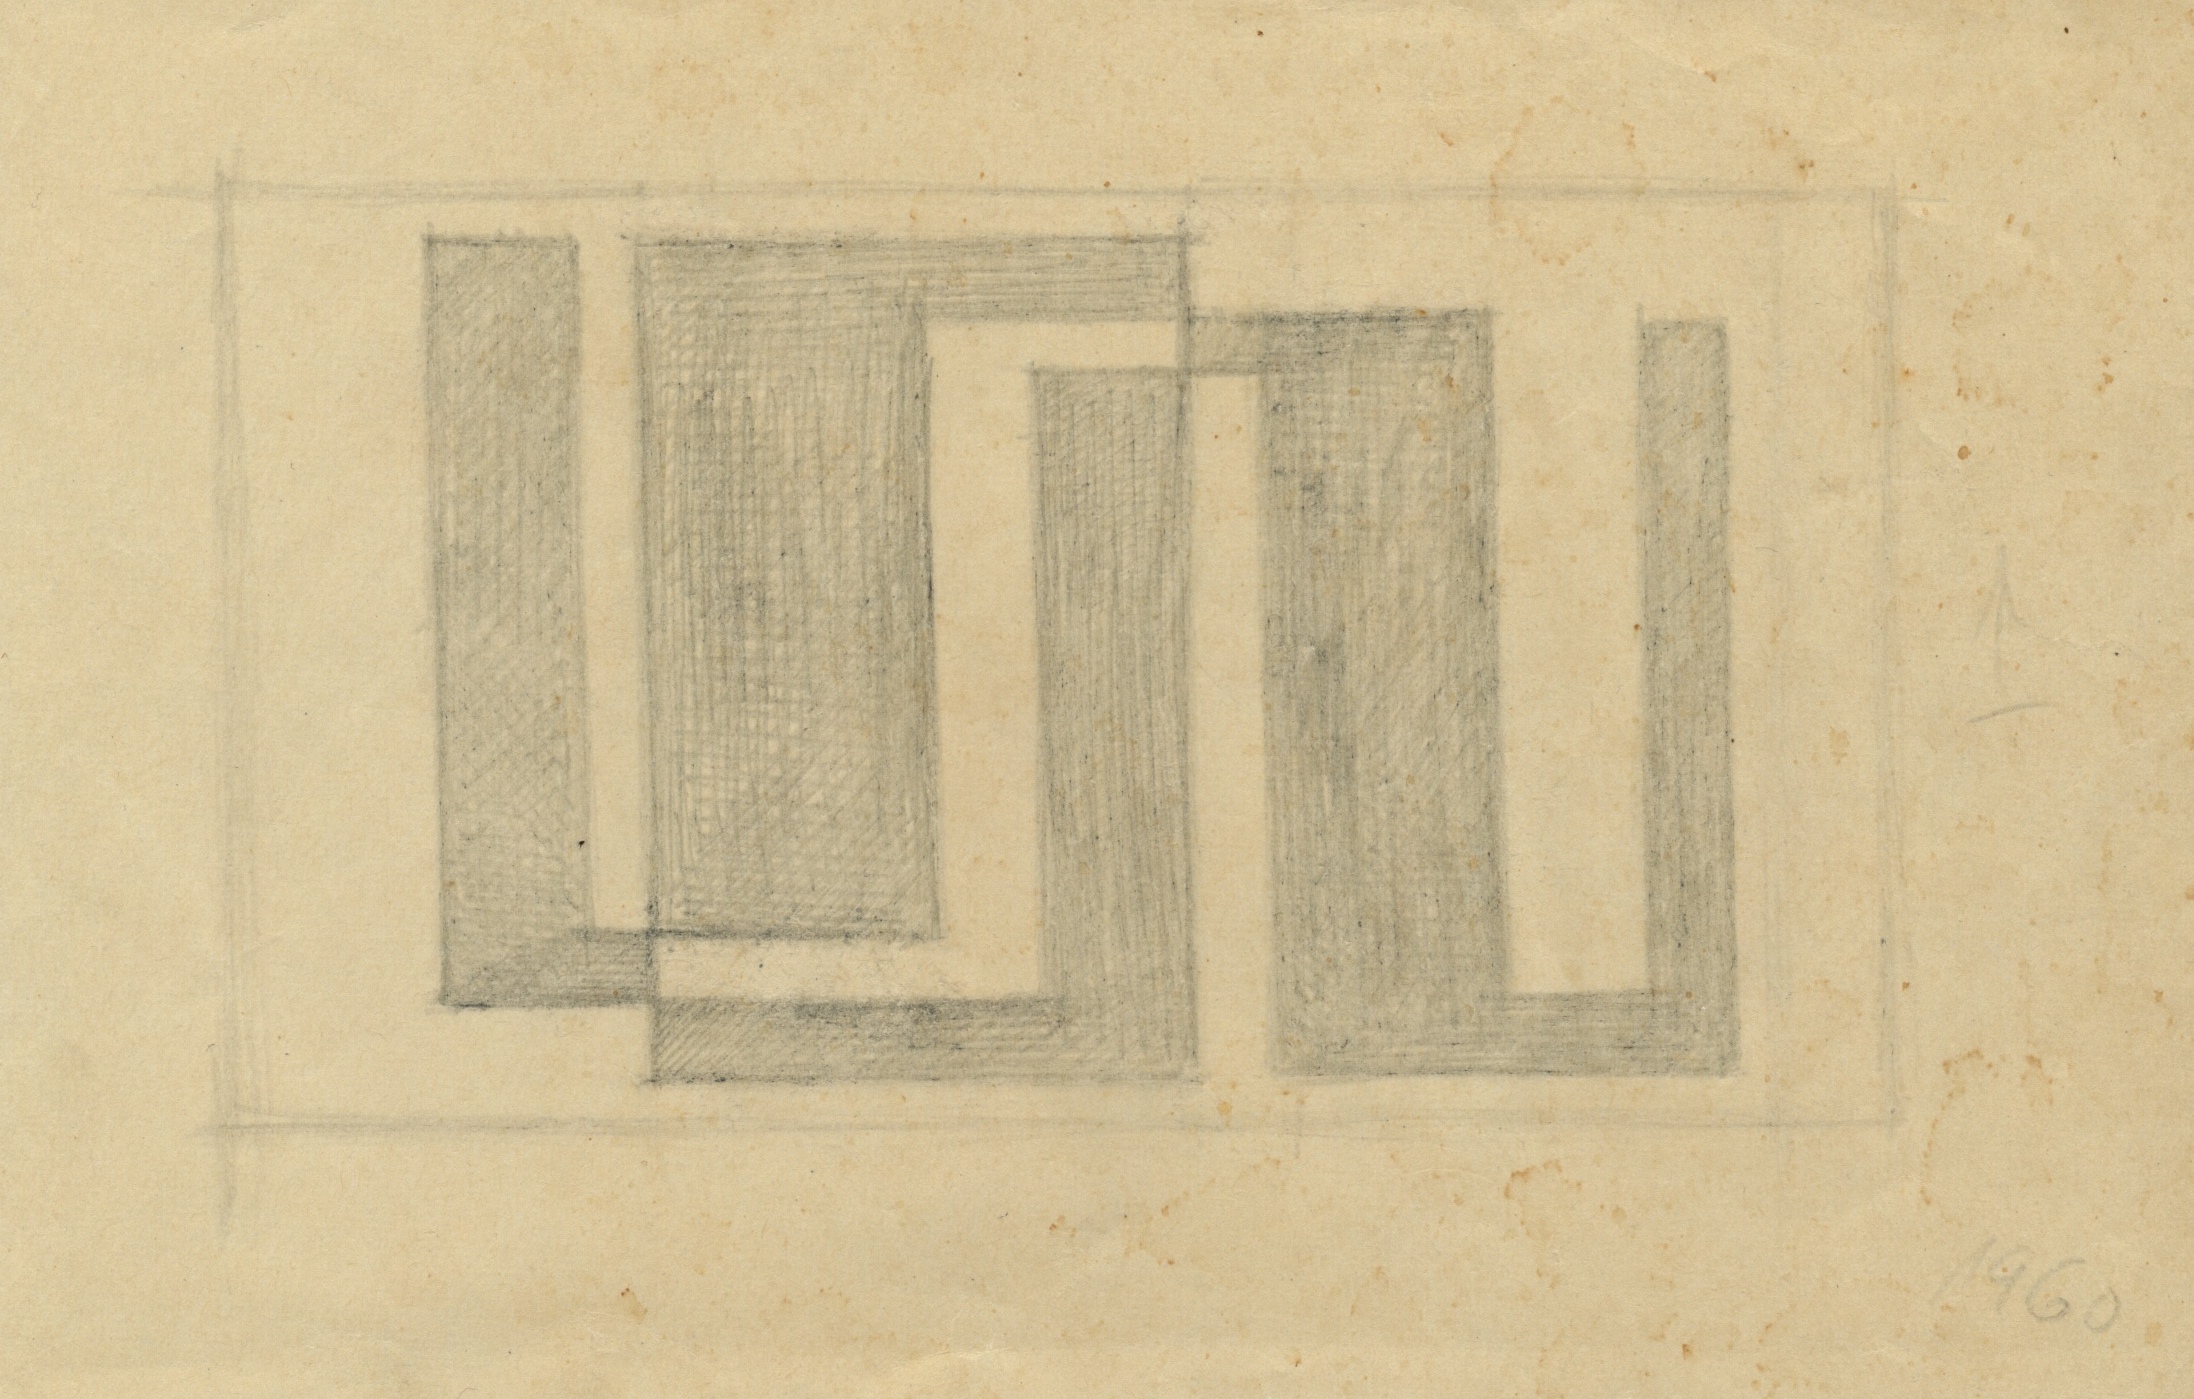 Untitled, pencil on paper, 12 x 19 cm, 1960